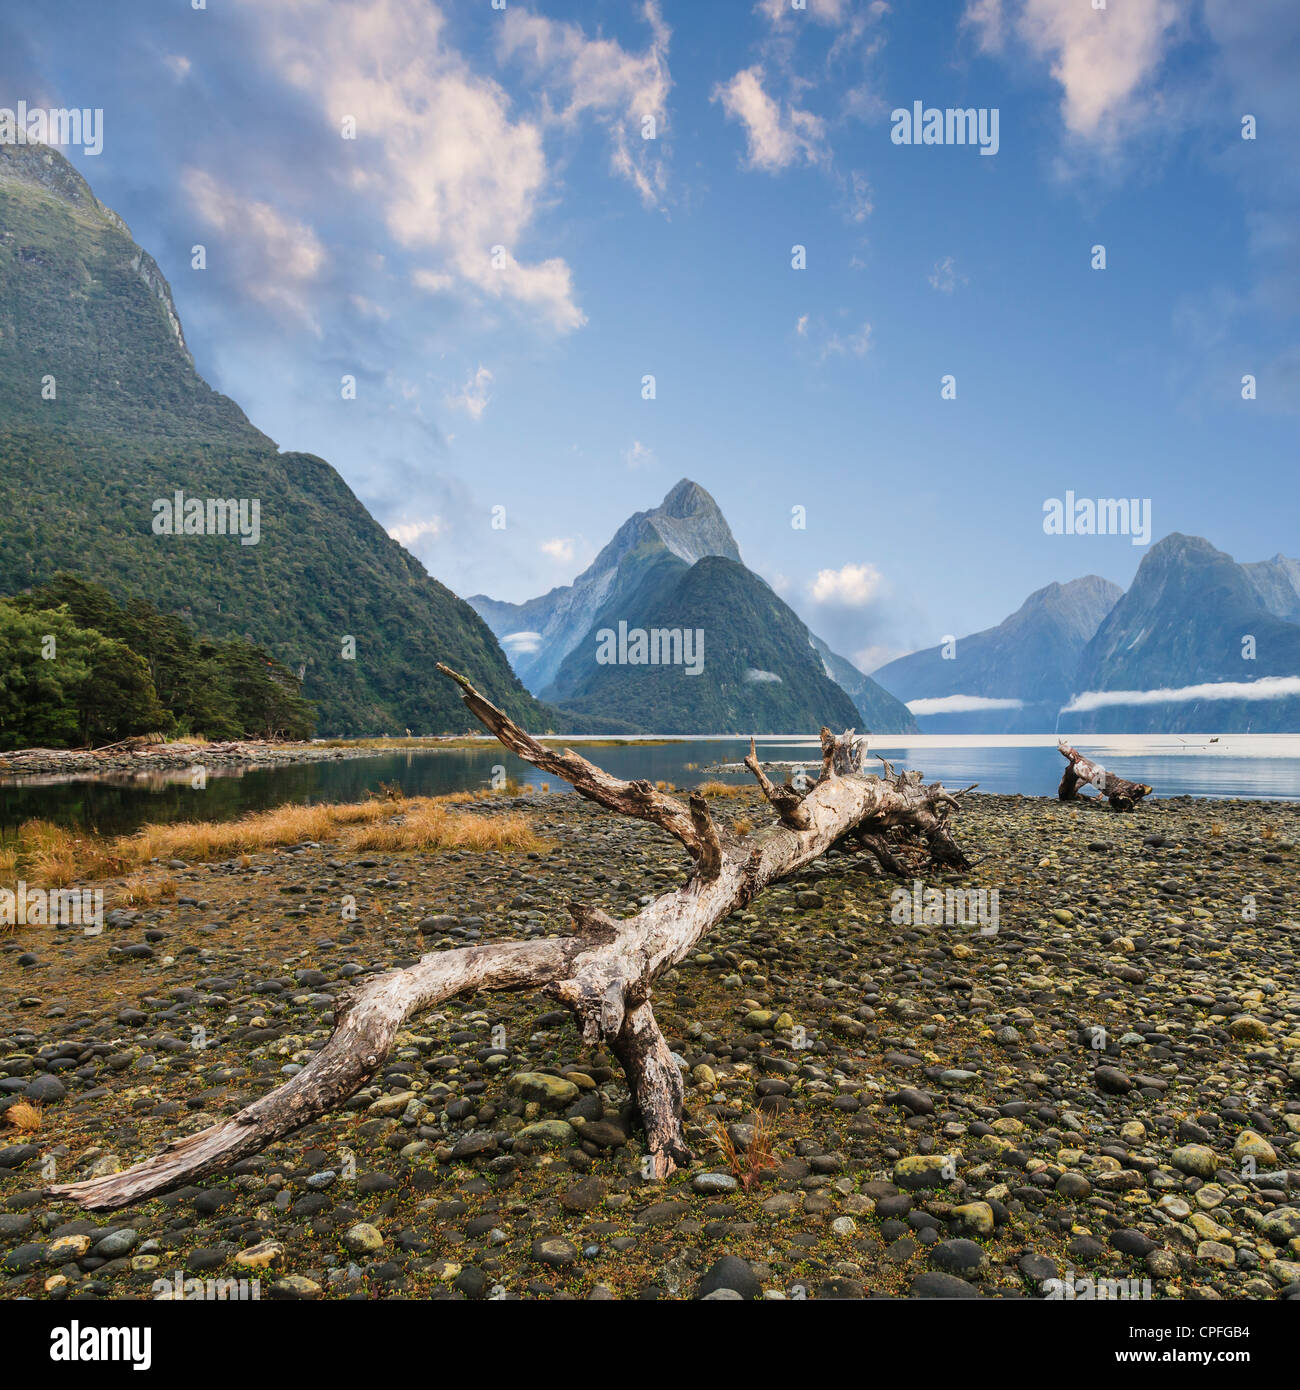 Early morning at Milford Sound, one of New Zealand's best known locations, known for its wild natural beauty. Stock Photo